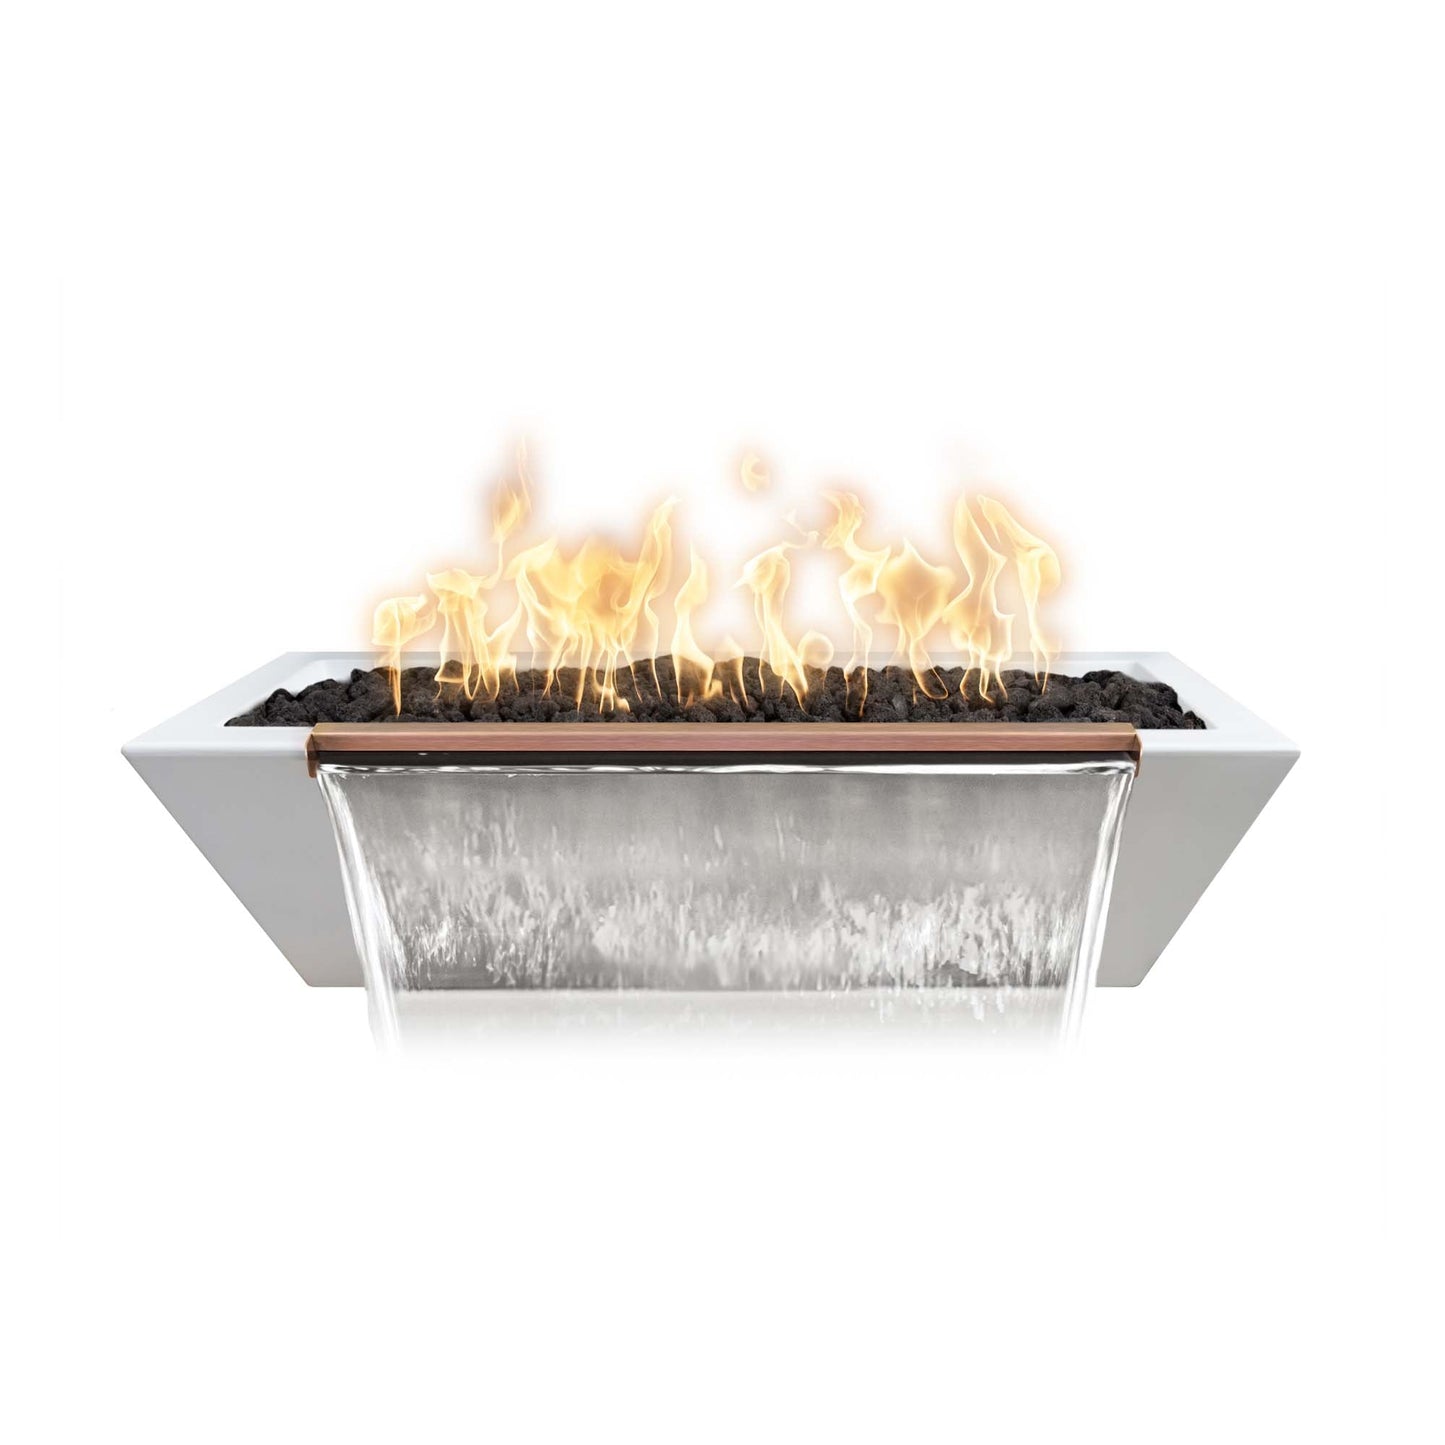 The Outdoor Plus Linear Maya 48" Rustic Coffee GFRC Concrete Natural Gas Fire & Water Bowl with Match Lit with Flame Sense Ignition